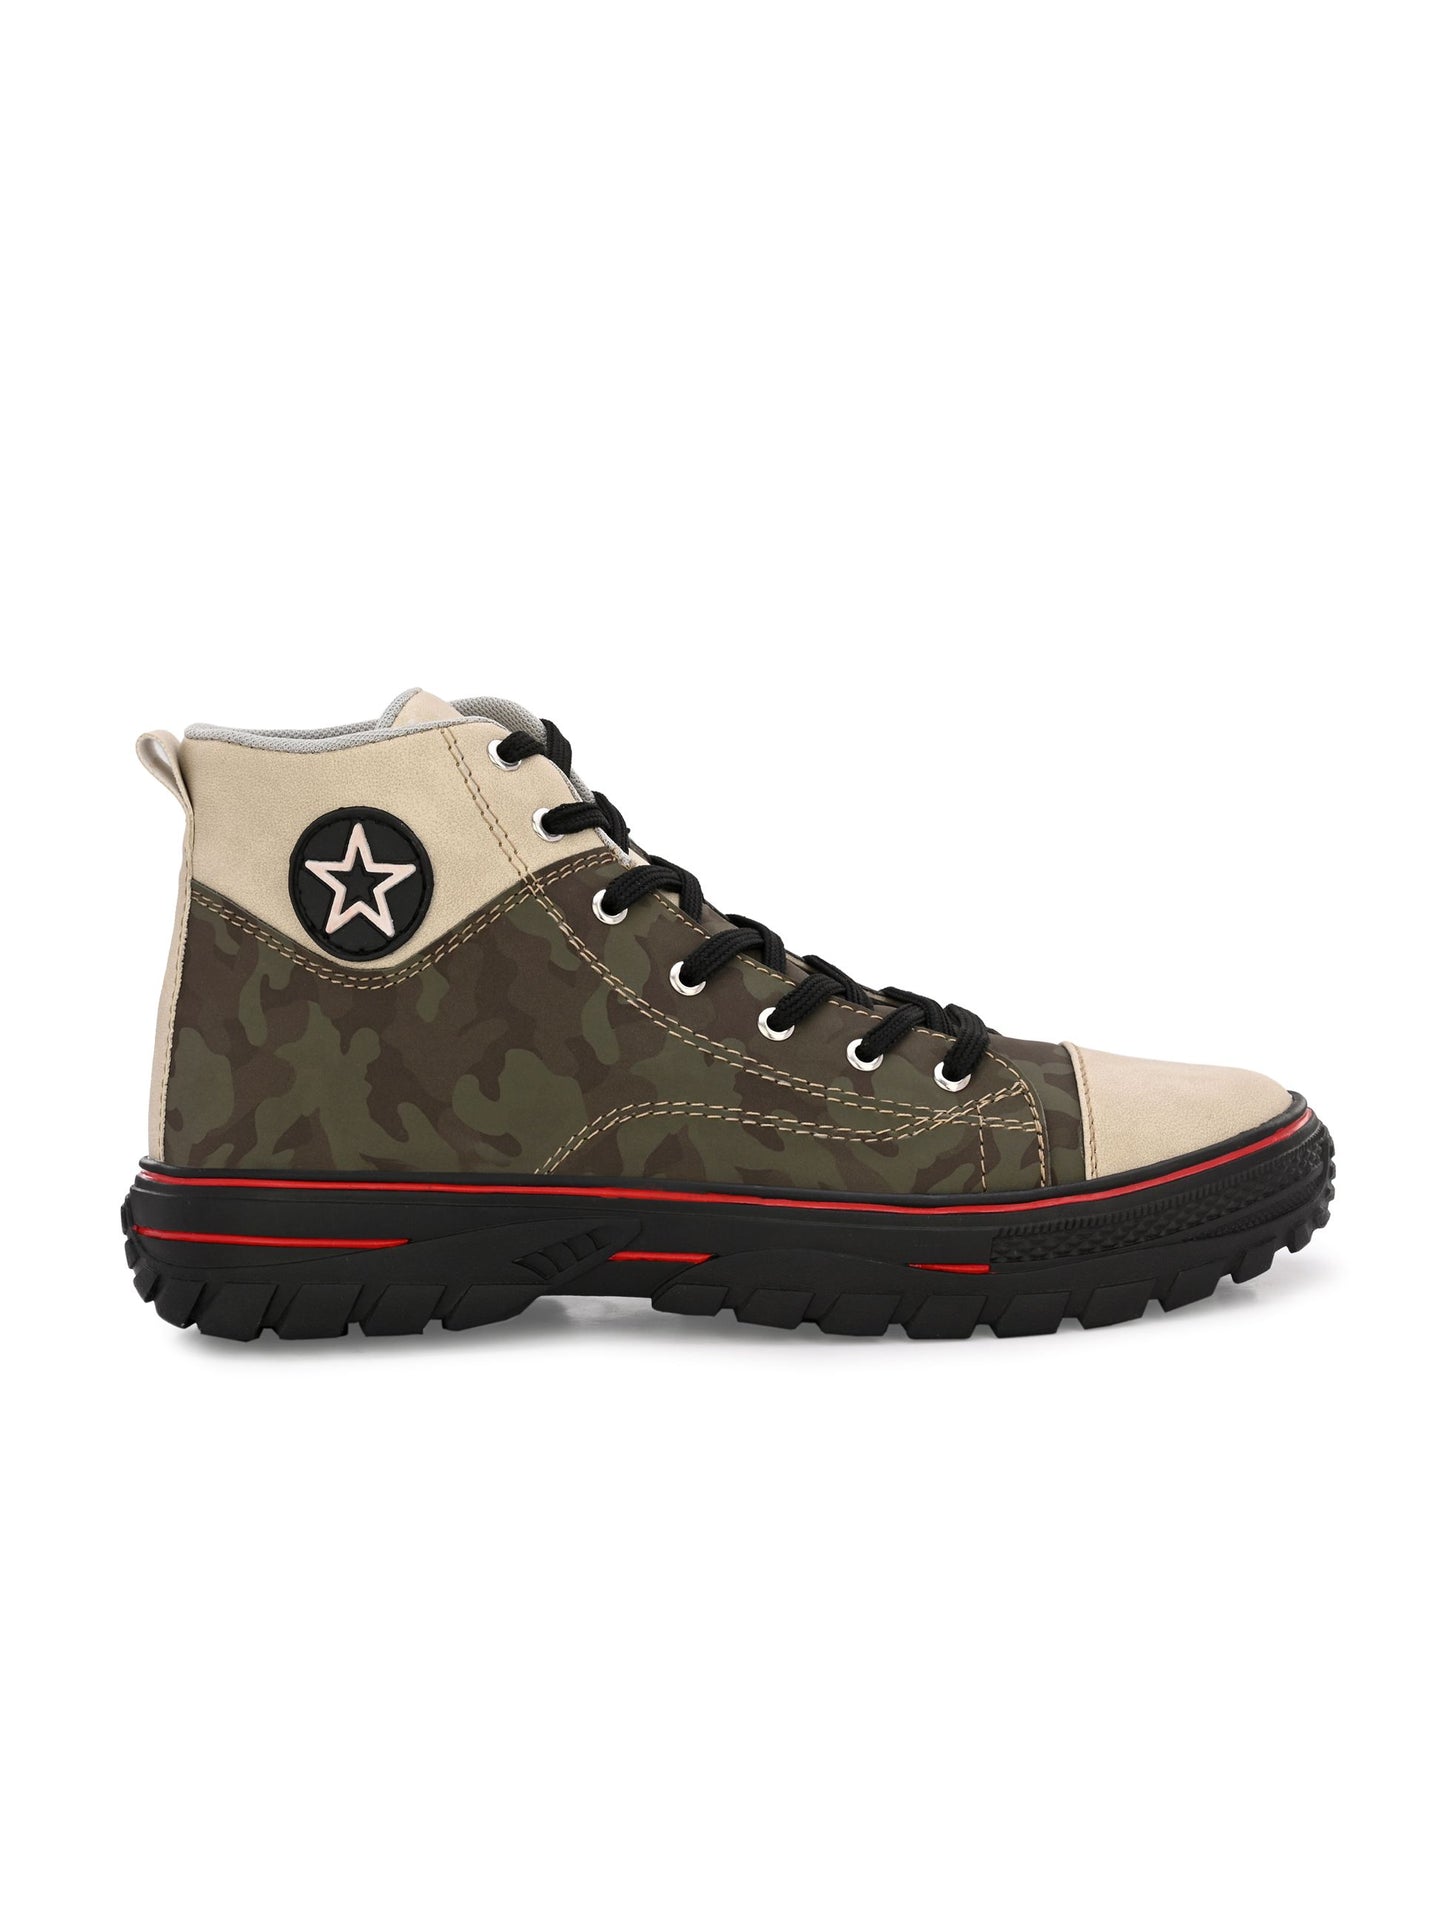 Bucik Men Olive Synthetic Leather Lace-Up
 Boots